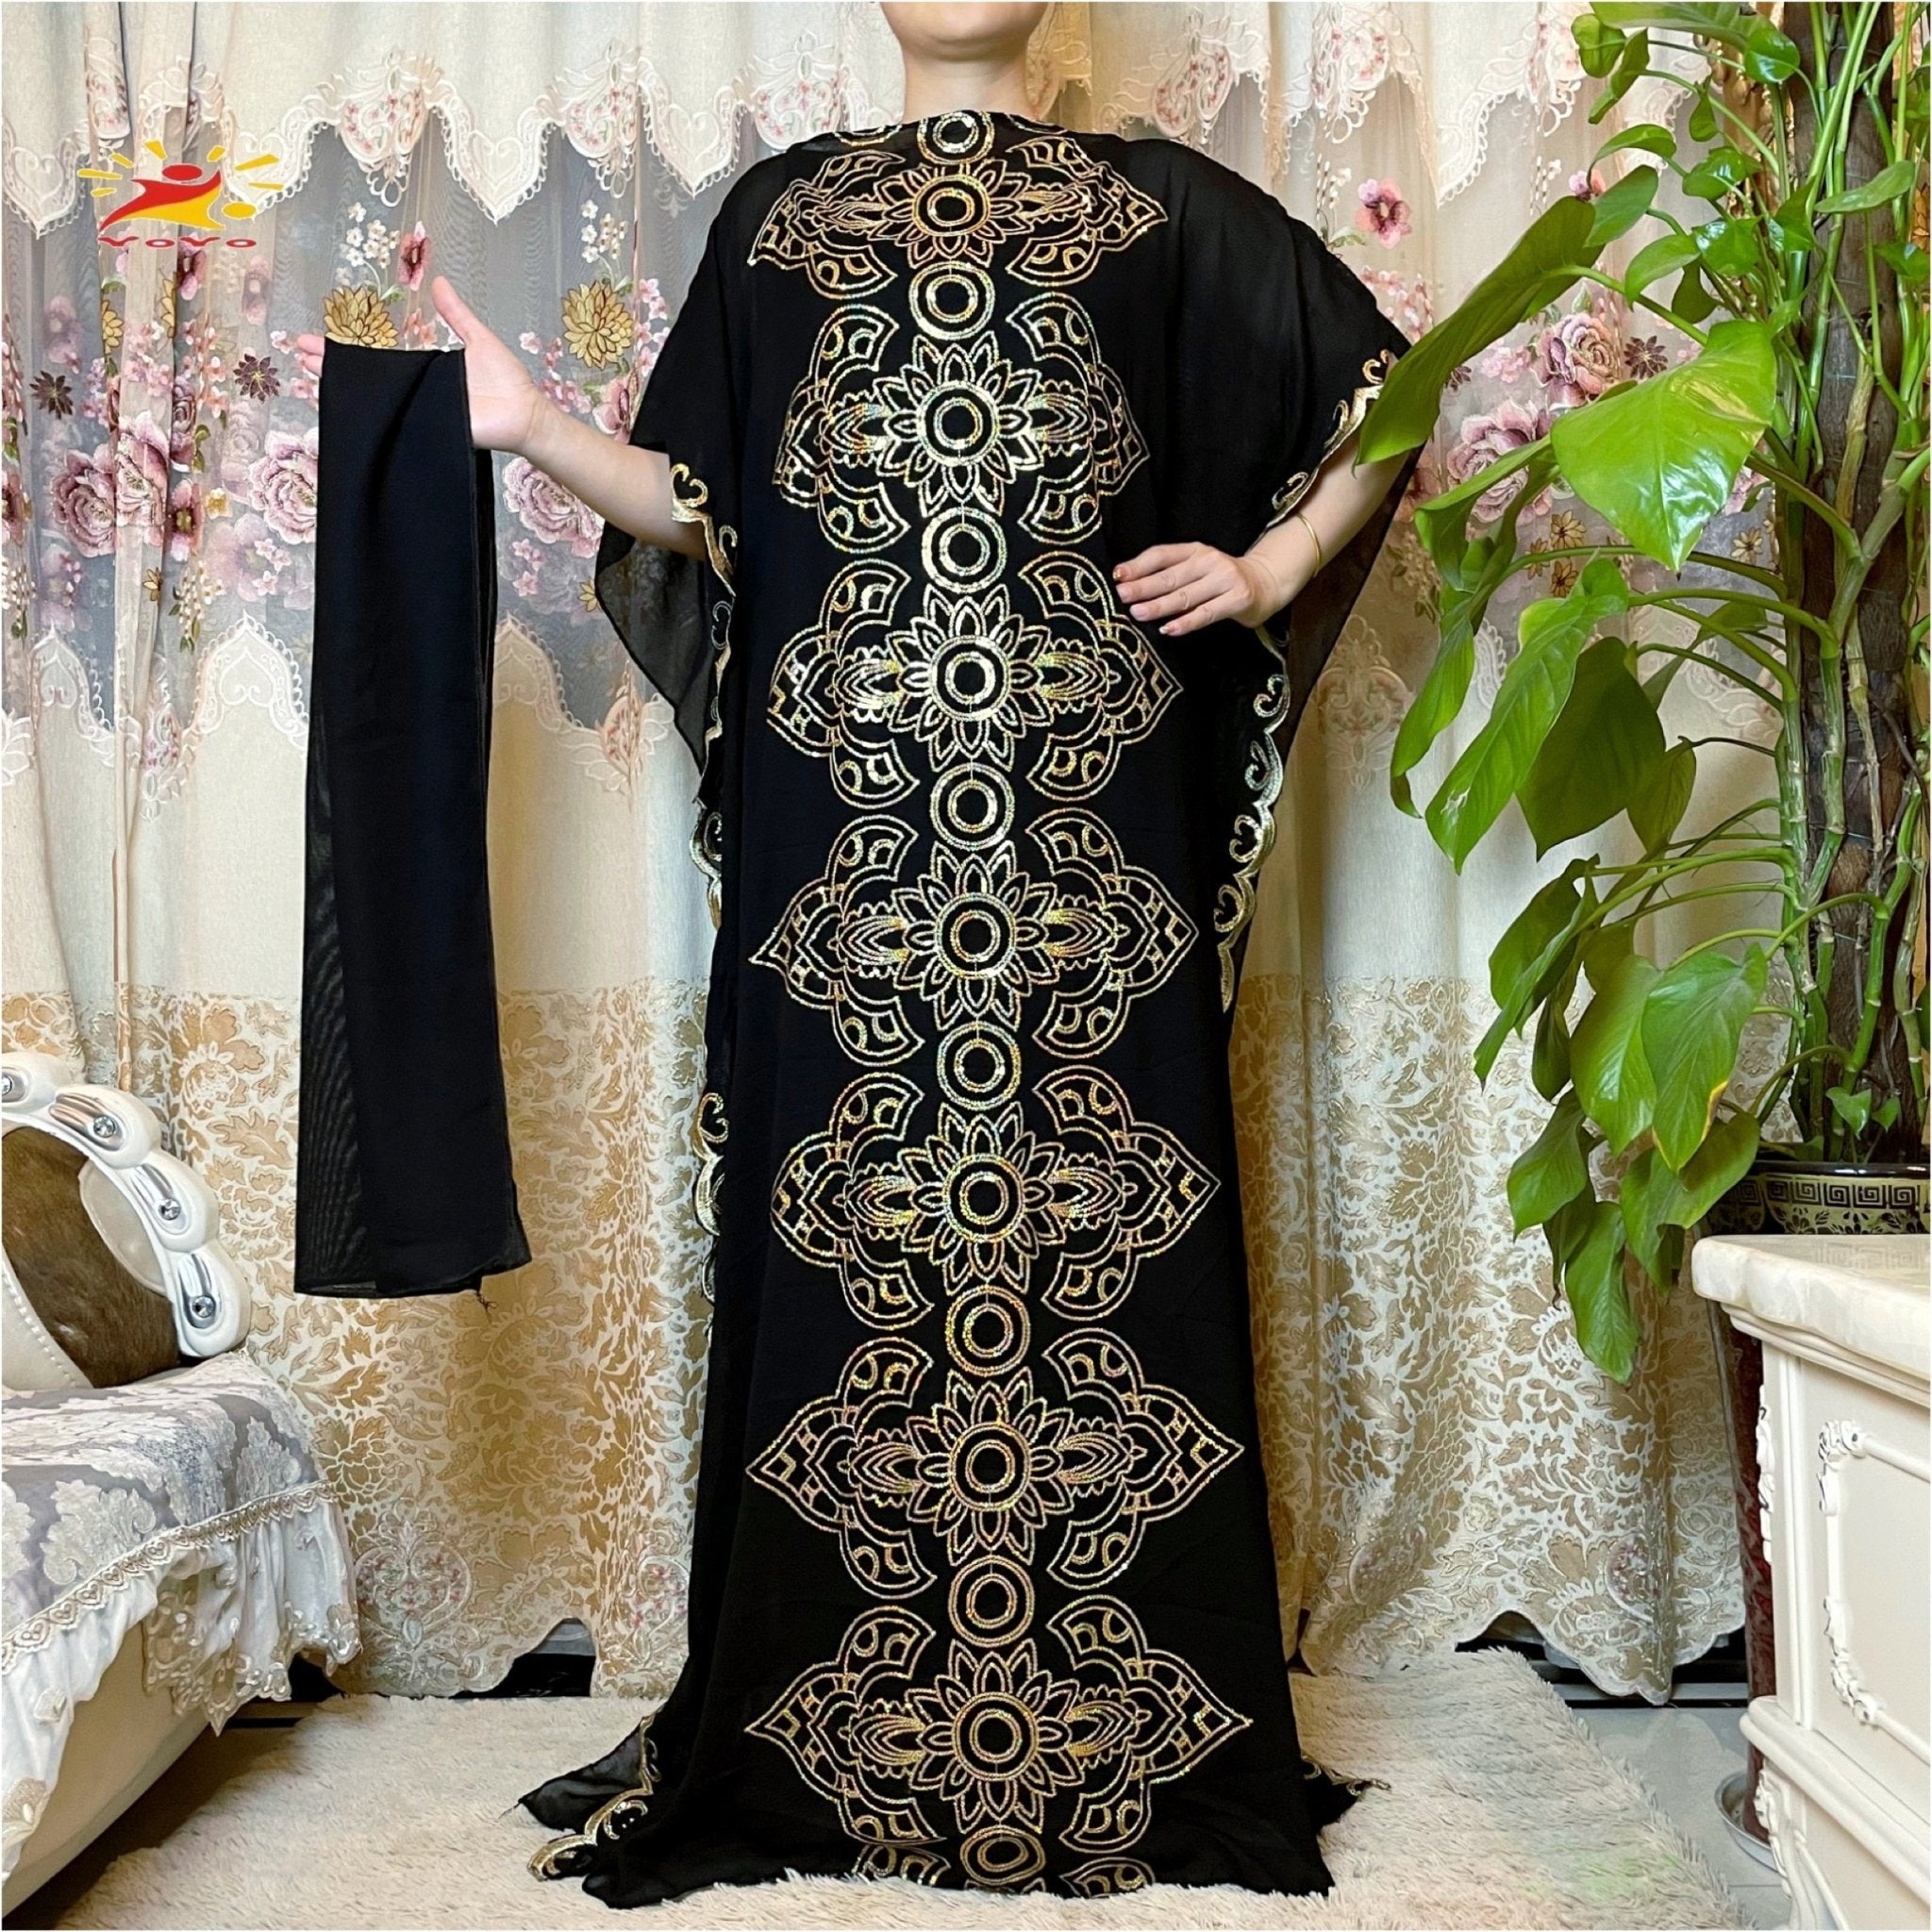 Stunning African Embroidery Flower Dress for Women - Muslim Sequin Embroidery and Scarf Included - Flexi Africa FREE POST